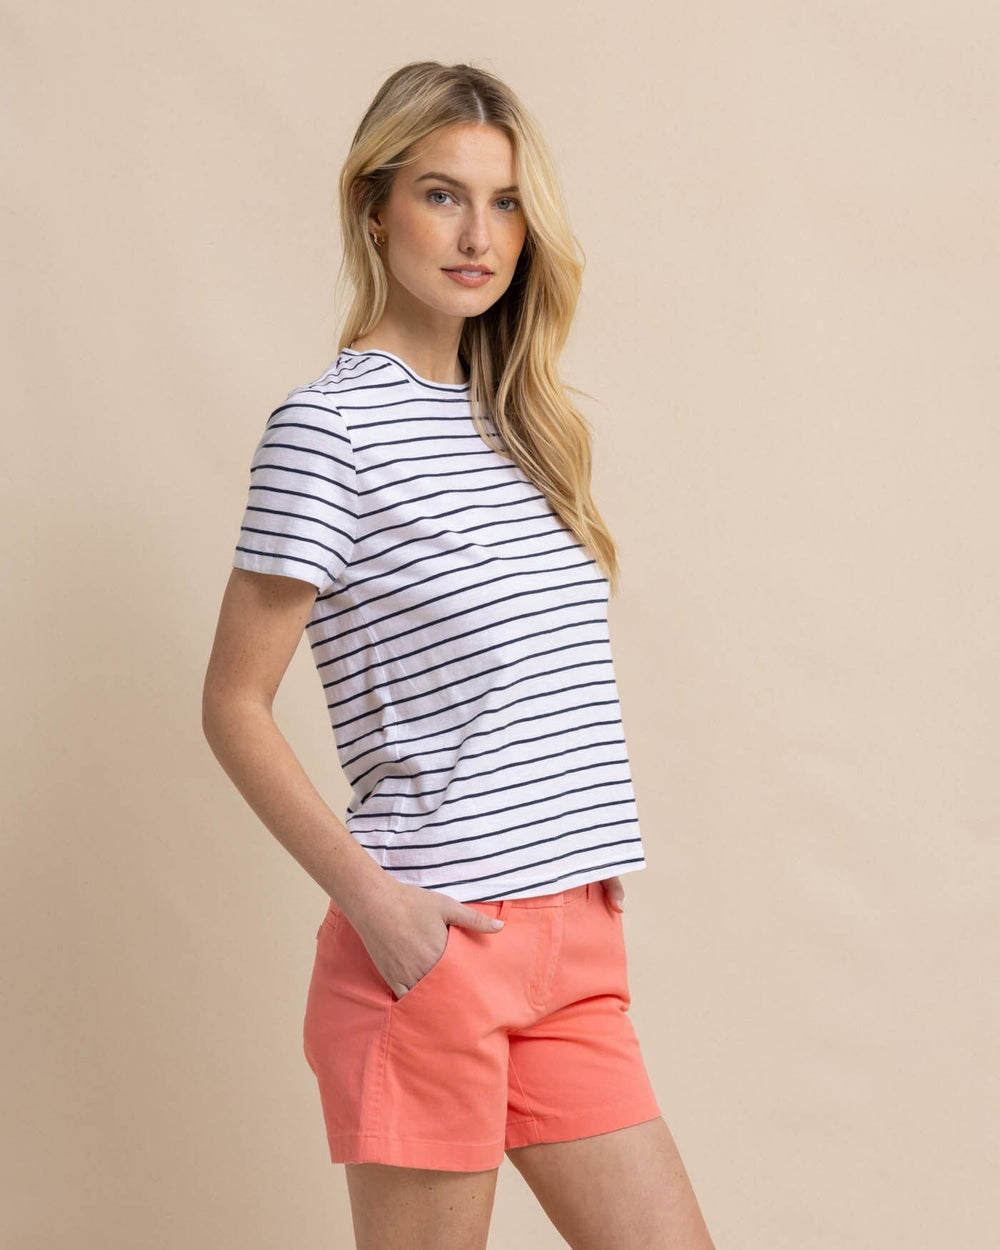 The front view of the Southern Tide Sun Farer Stripe Crew Neck T-Shirt by Southern Tide - Dress Blue